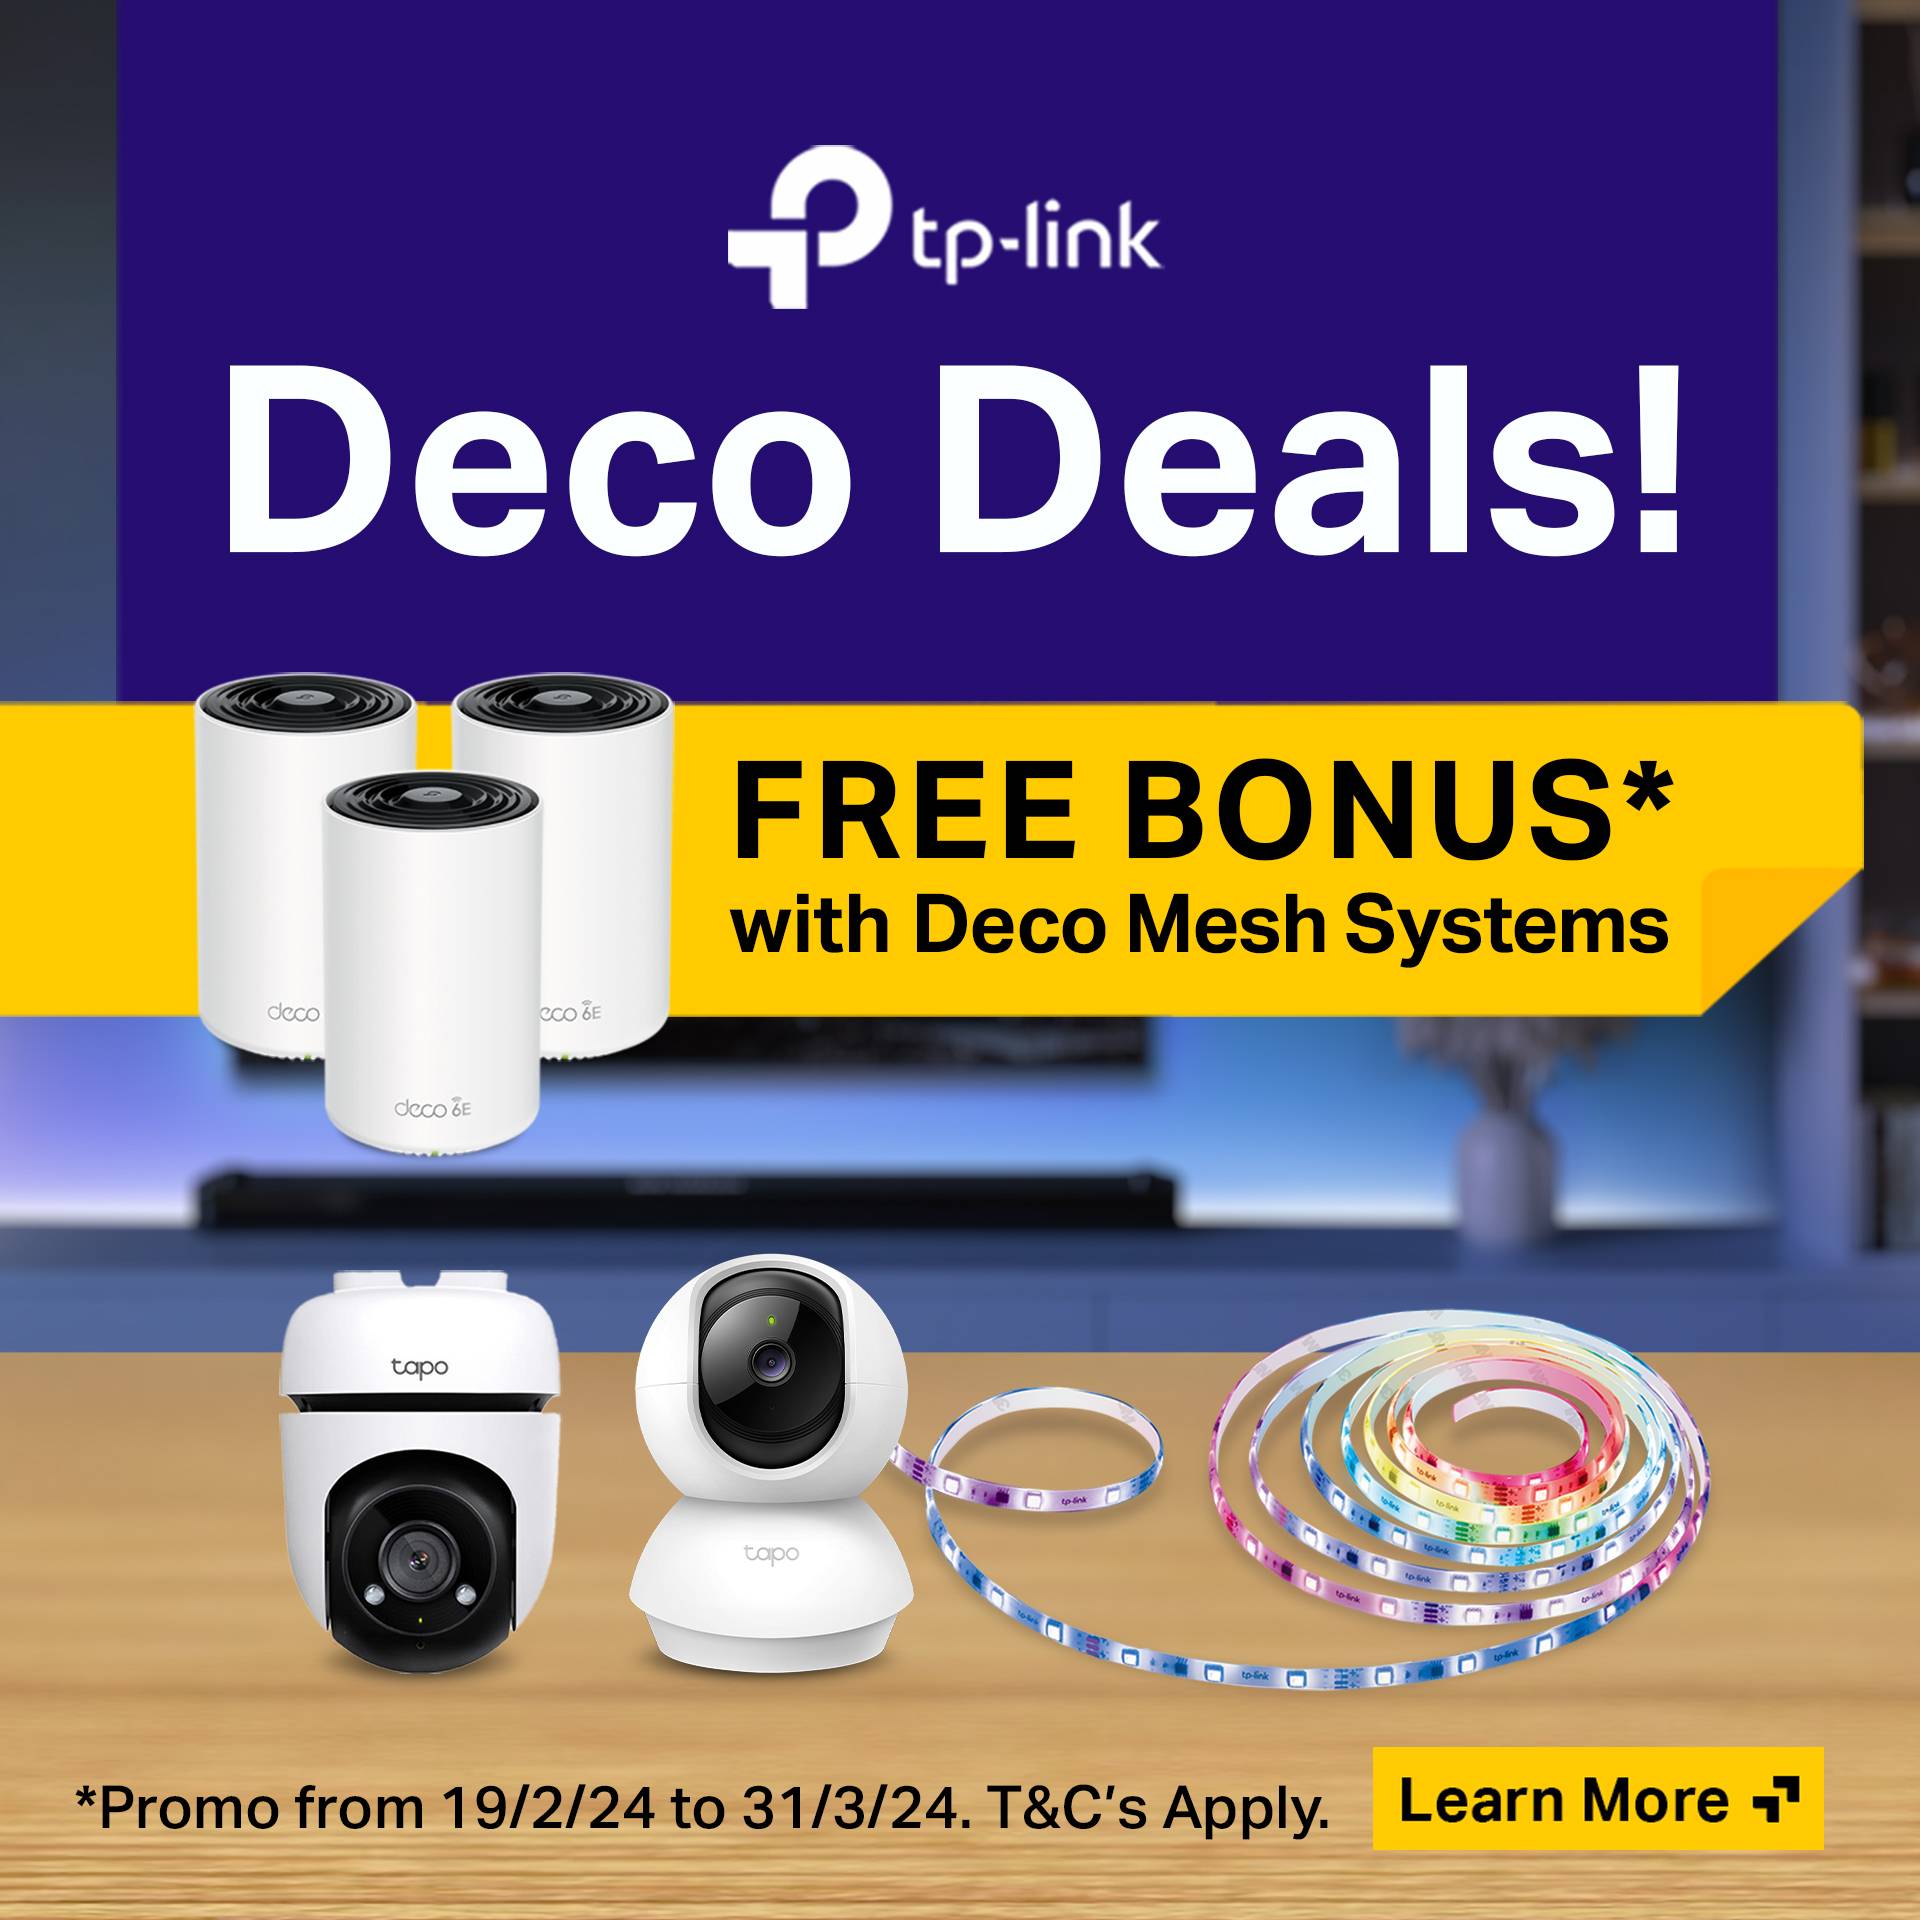 Get FREE BONUS with Selected Deco Mesh Systems